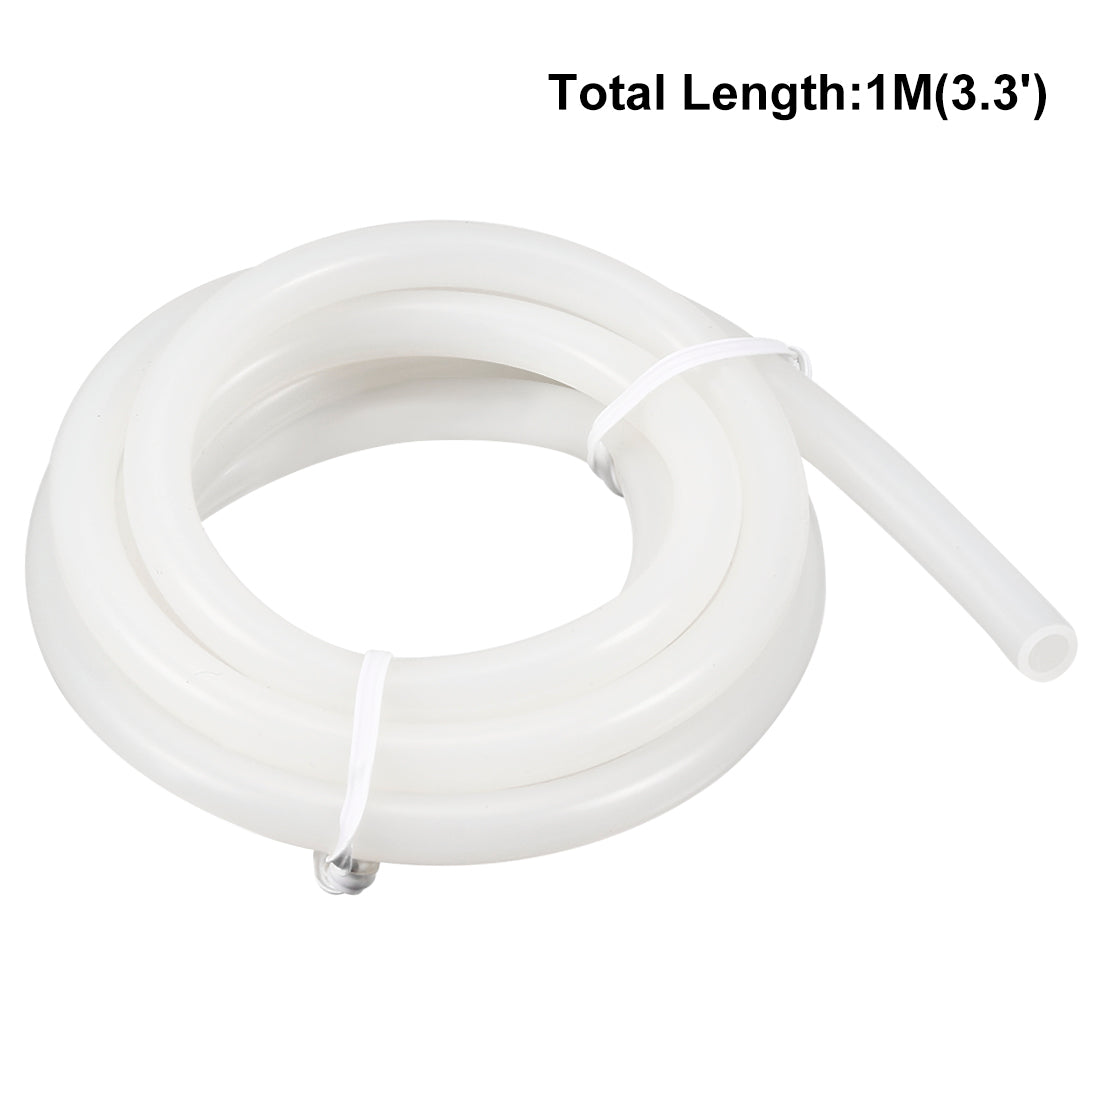 uxcell Uxcell Silicone Tube 4mm ID X 6mm OD 3.3' Flexible Silicone Rubber Tubing Water Air Hose Pipe Translucent for Pump Transfer